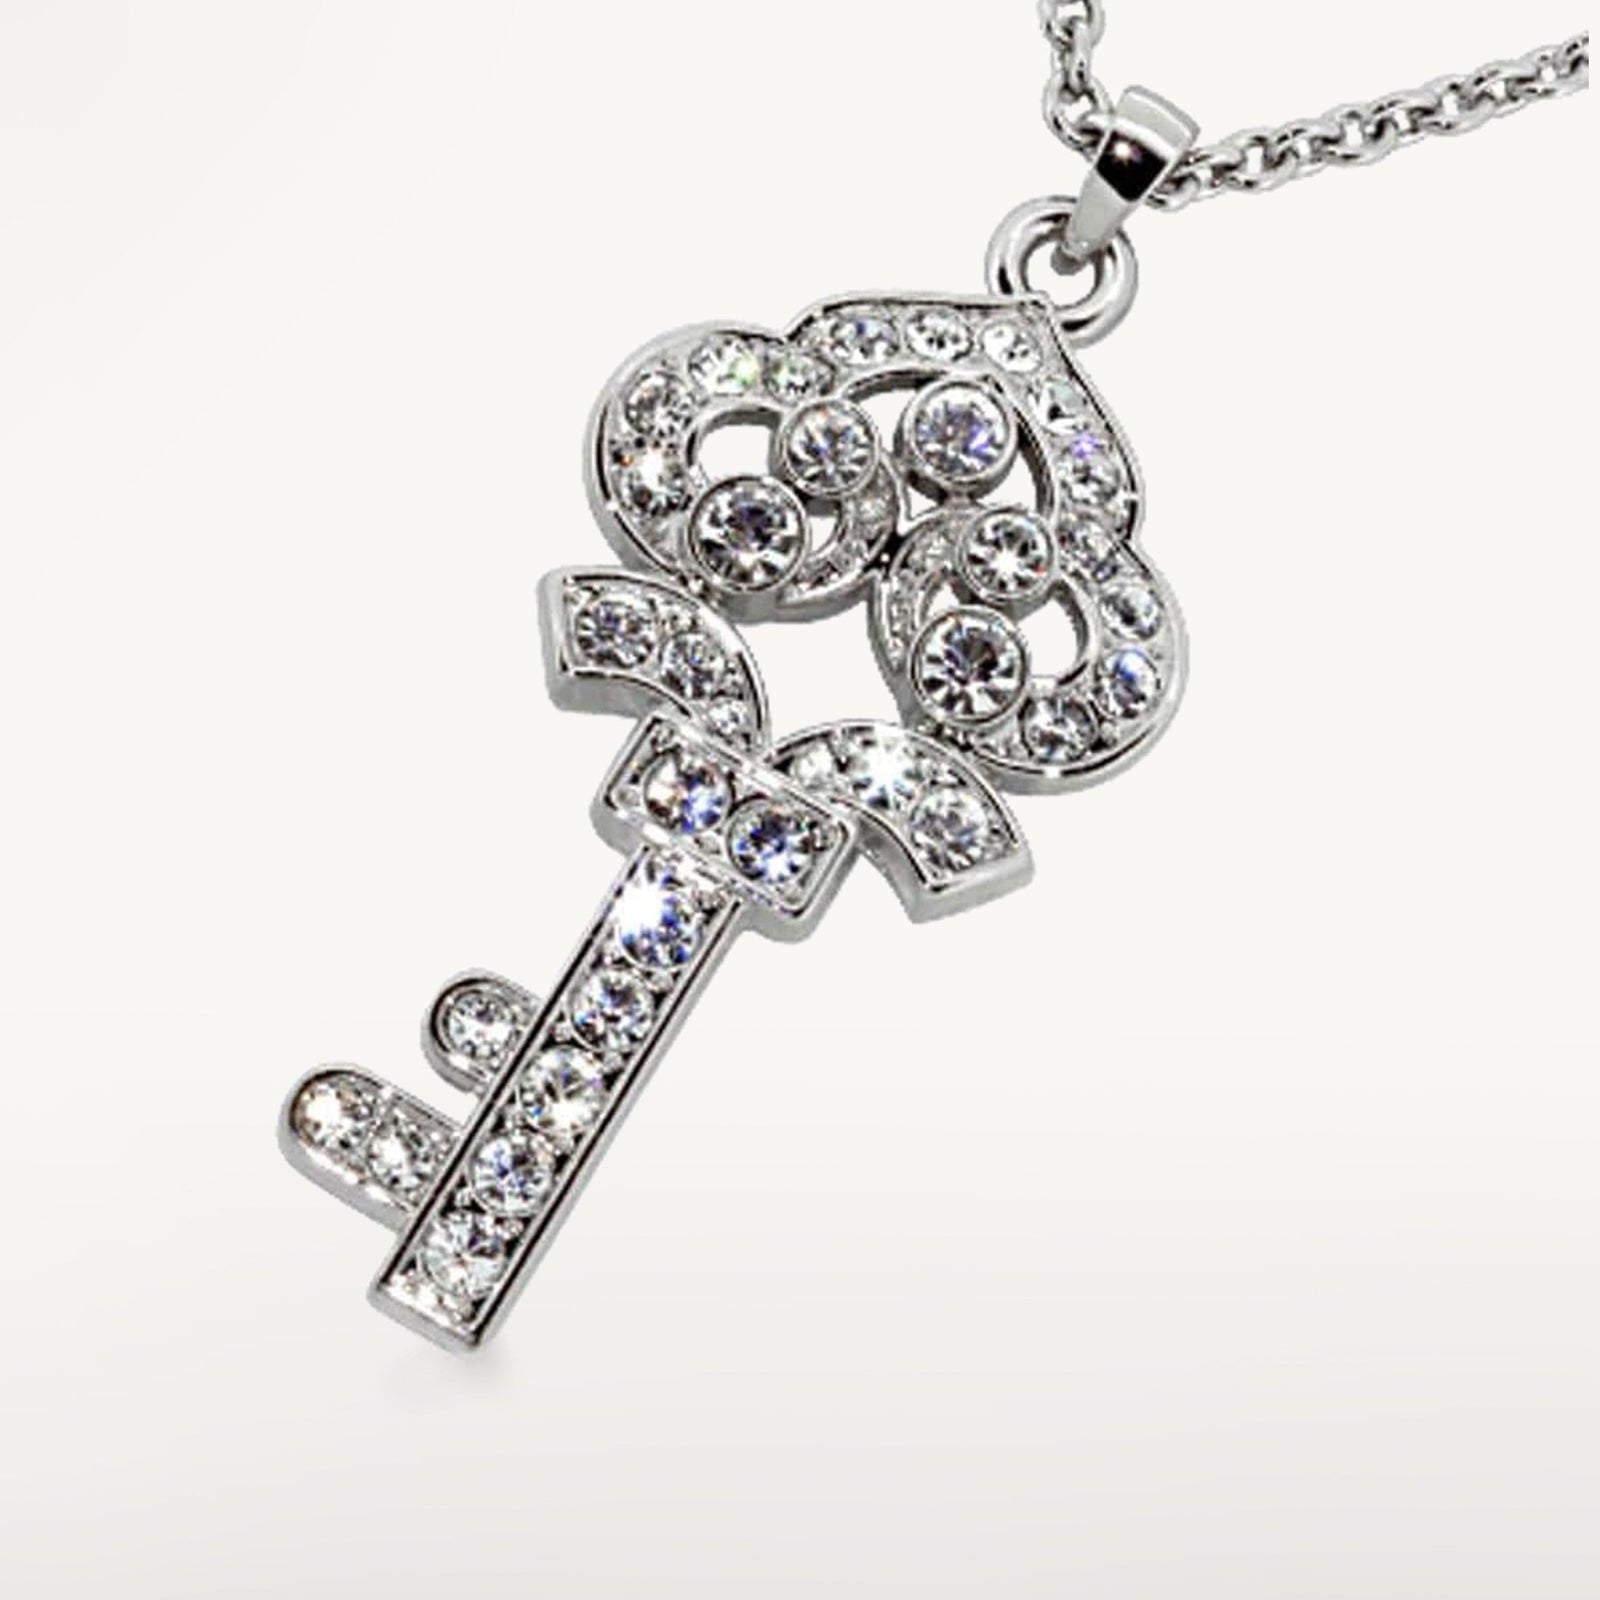 Kalifano Crystal Keychains SN-001 - Silver Crown Necklace made with Swarovski Crystals SN-001